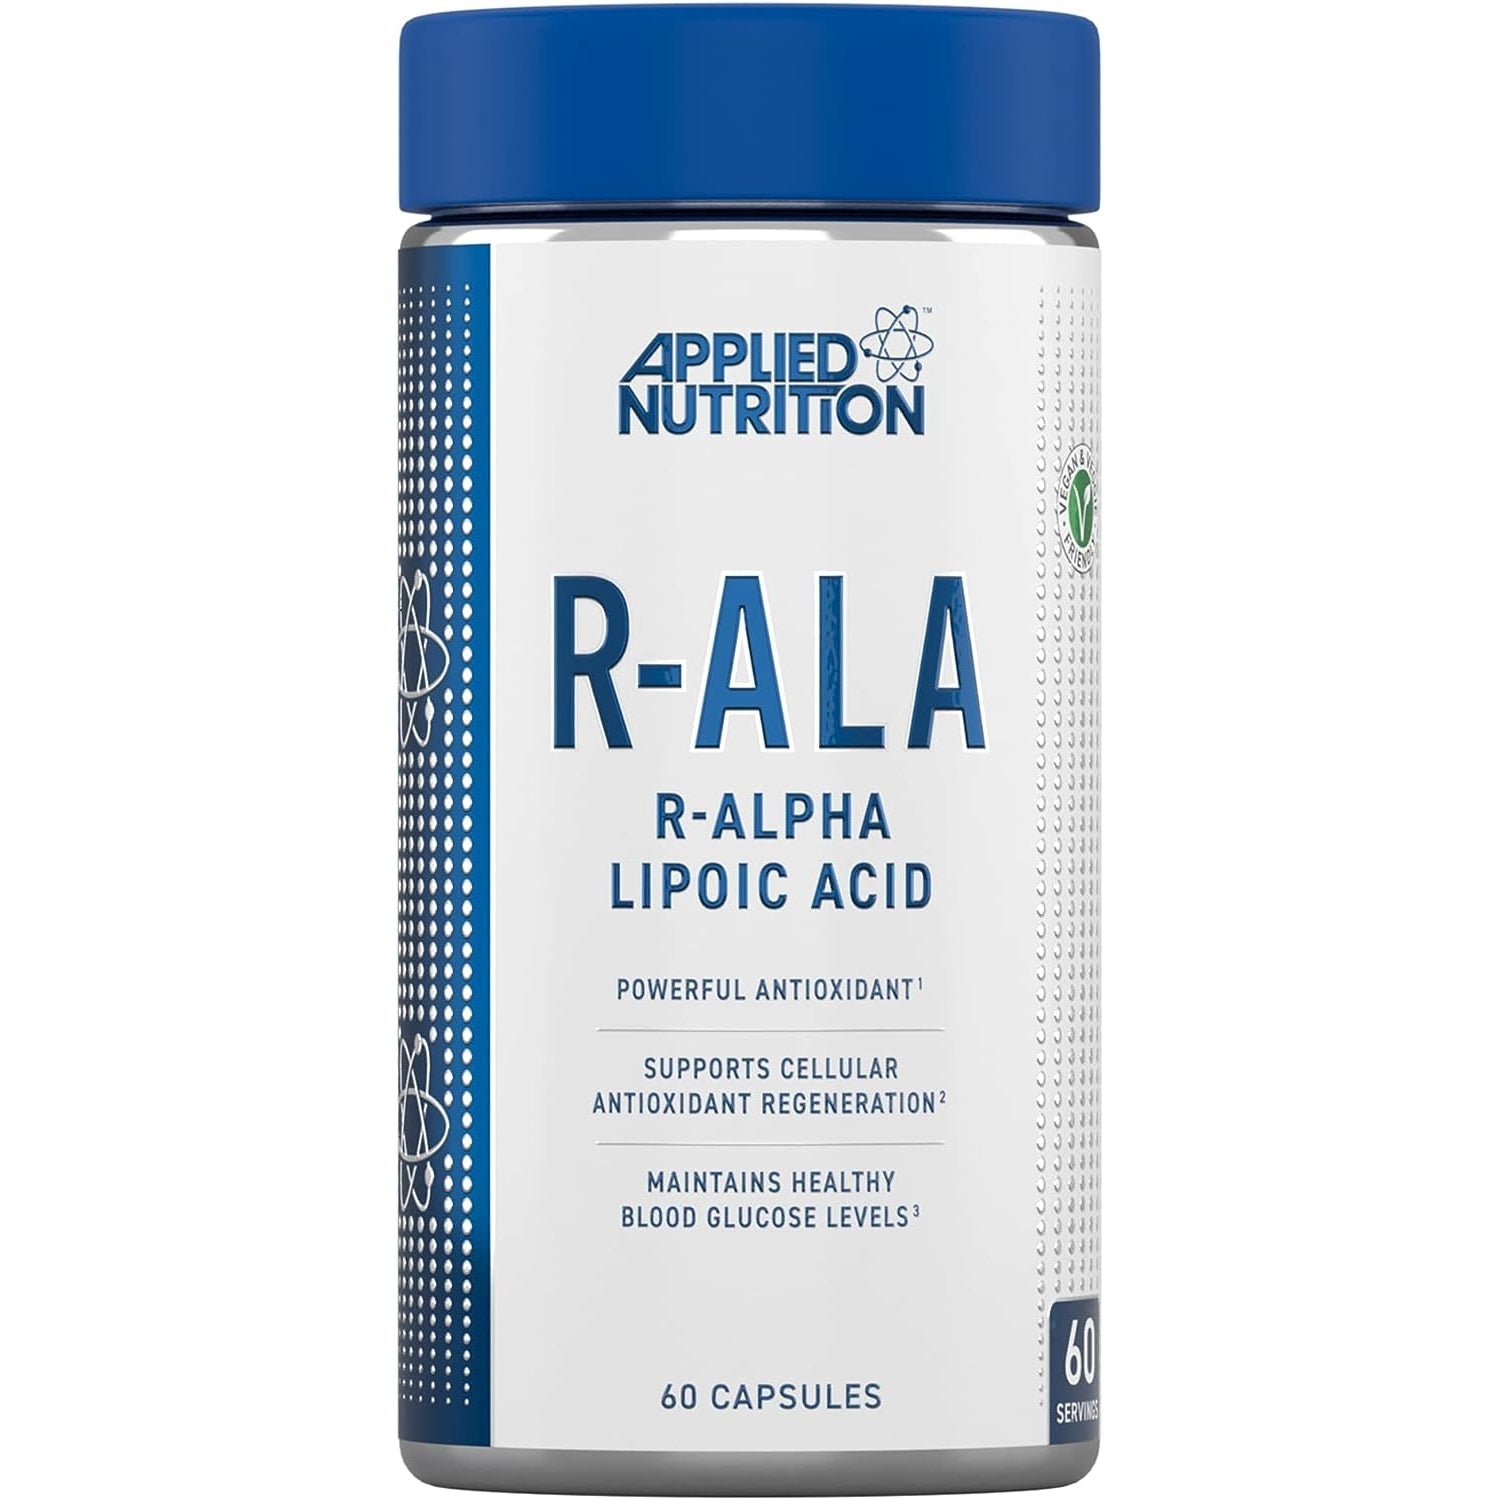 Applied Nutrition R-Alpha Lipoic Acid R-ALA 200mg 60 Vegetable Capsules - 2 Month Supply